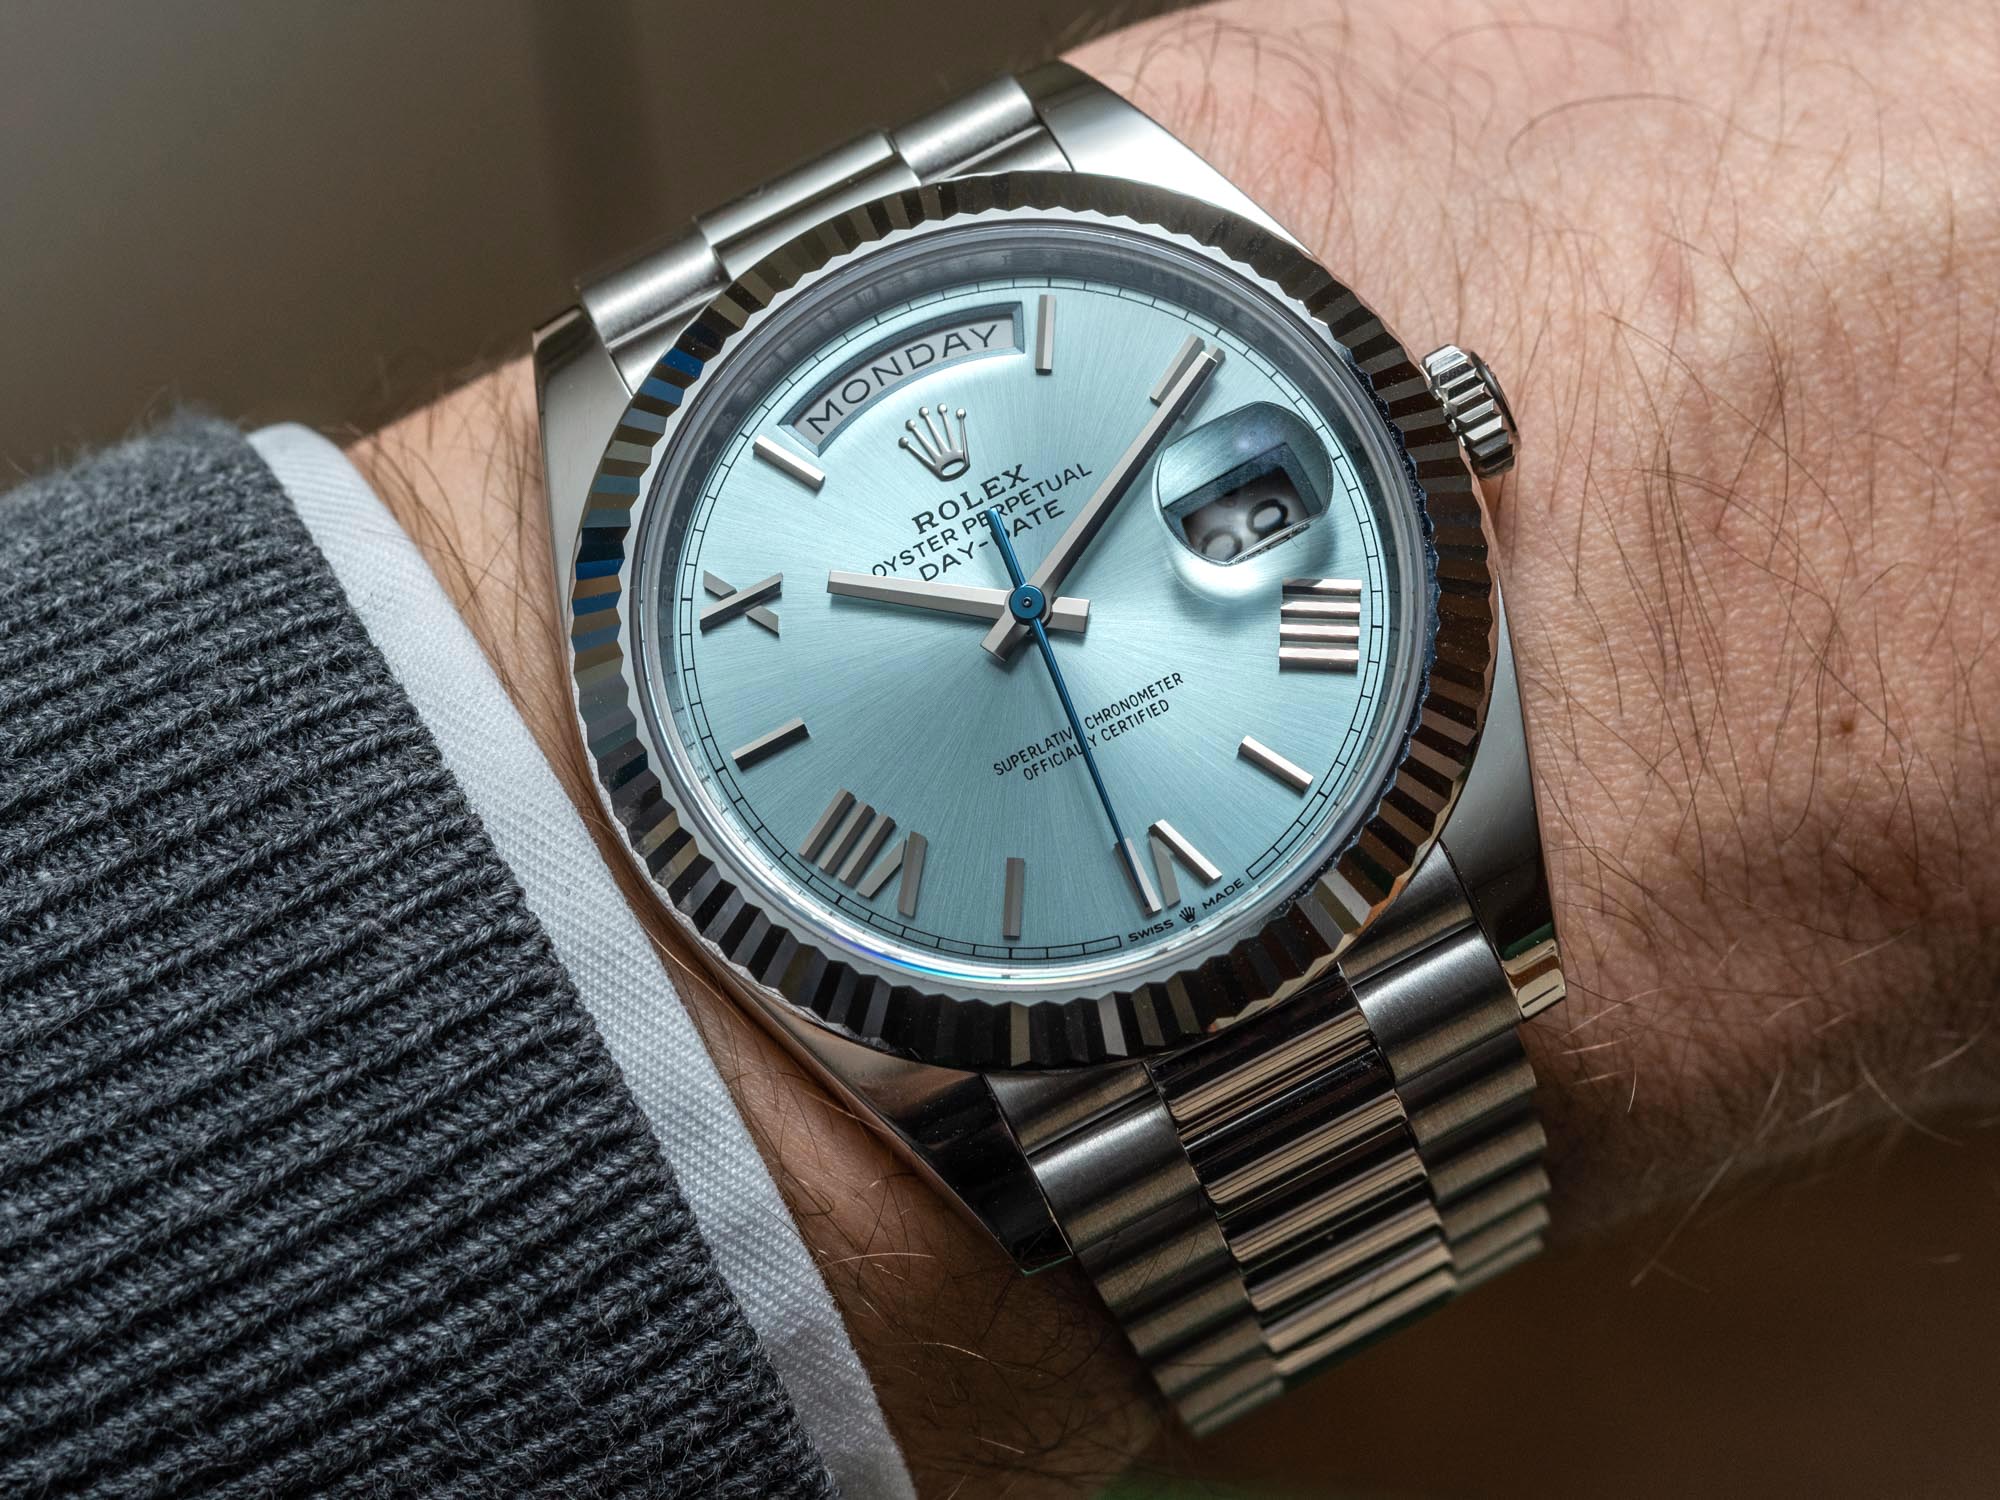 Hands-On: Platinum Rolex Day-Date 36 40 With Bezel Explained | aBlogtoWatch